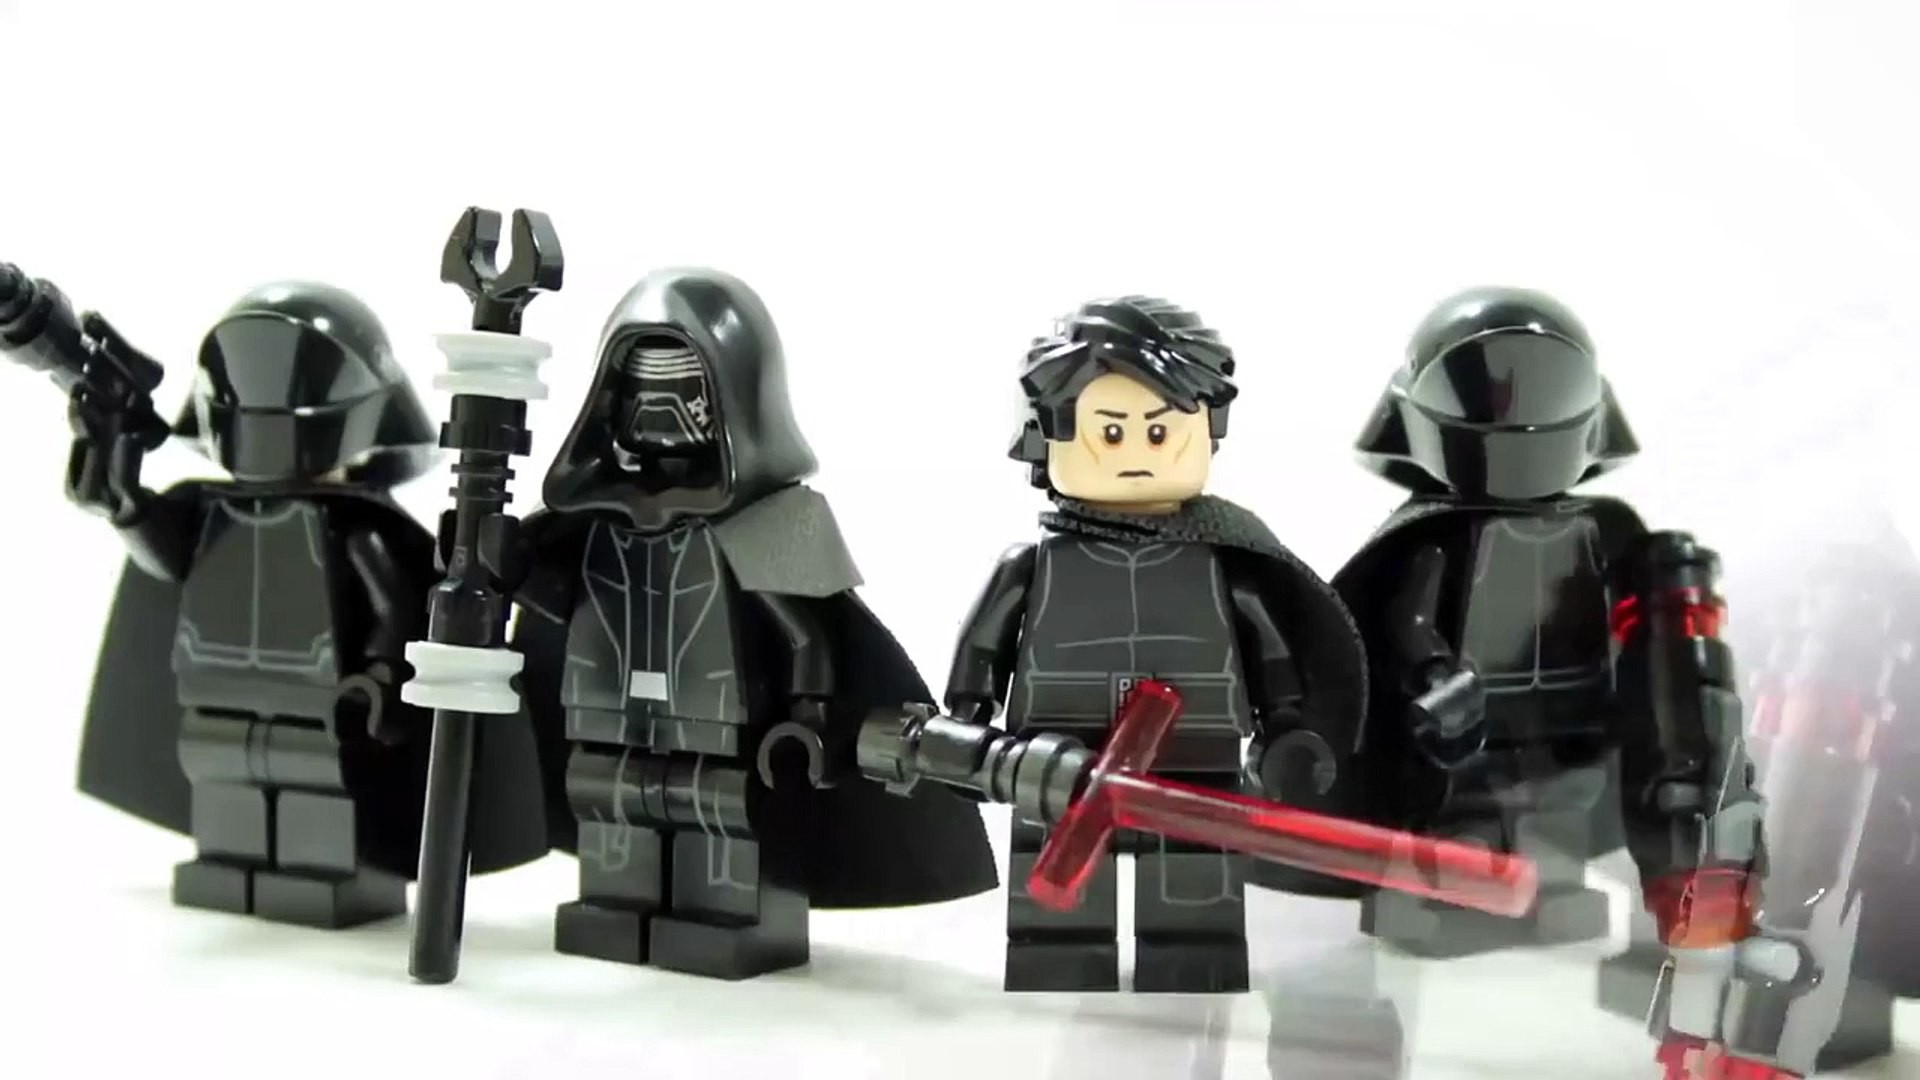 1920x1080 LEGO STAR WARS THE FORCE AWAKENS KNIGHTS OF REN MINIFIGURES - Dailymotion  Video